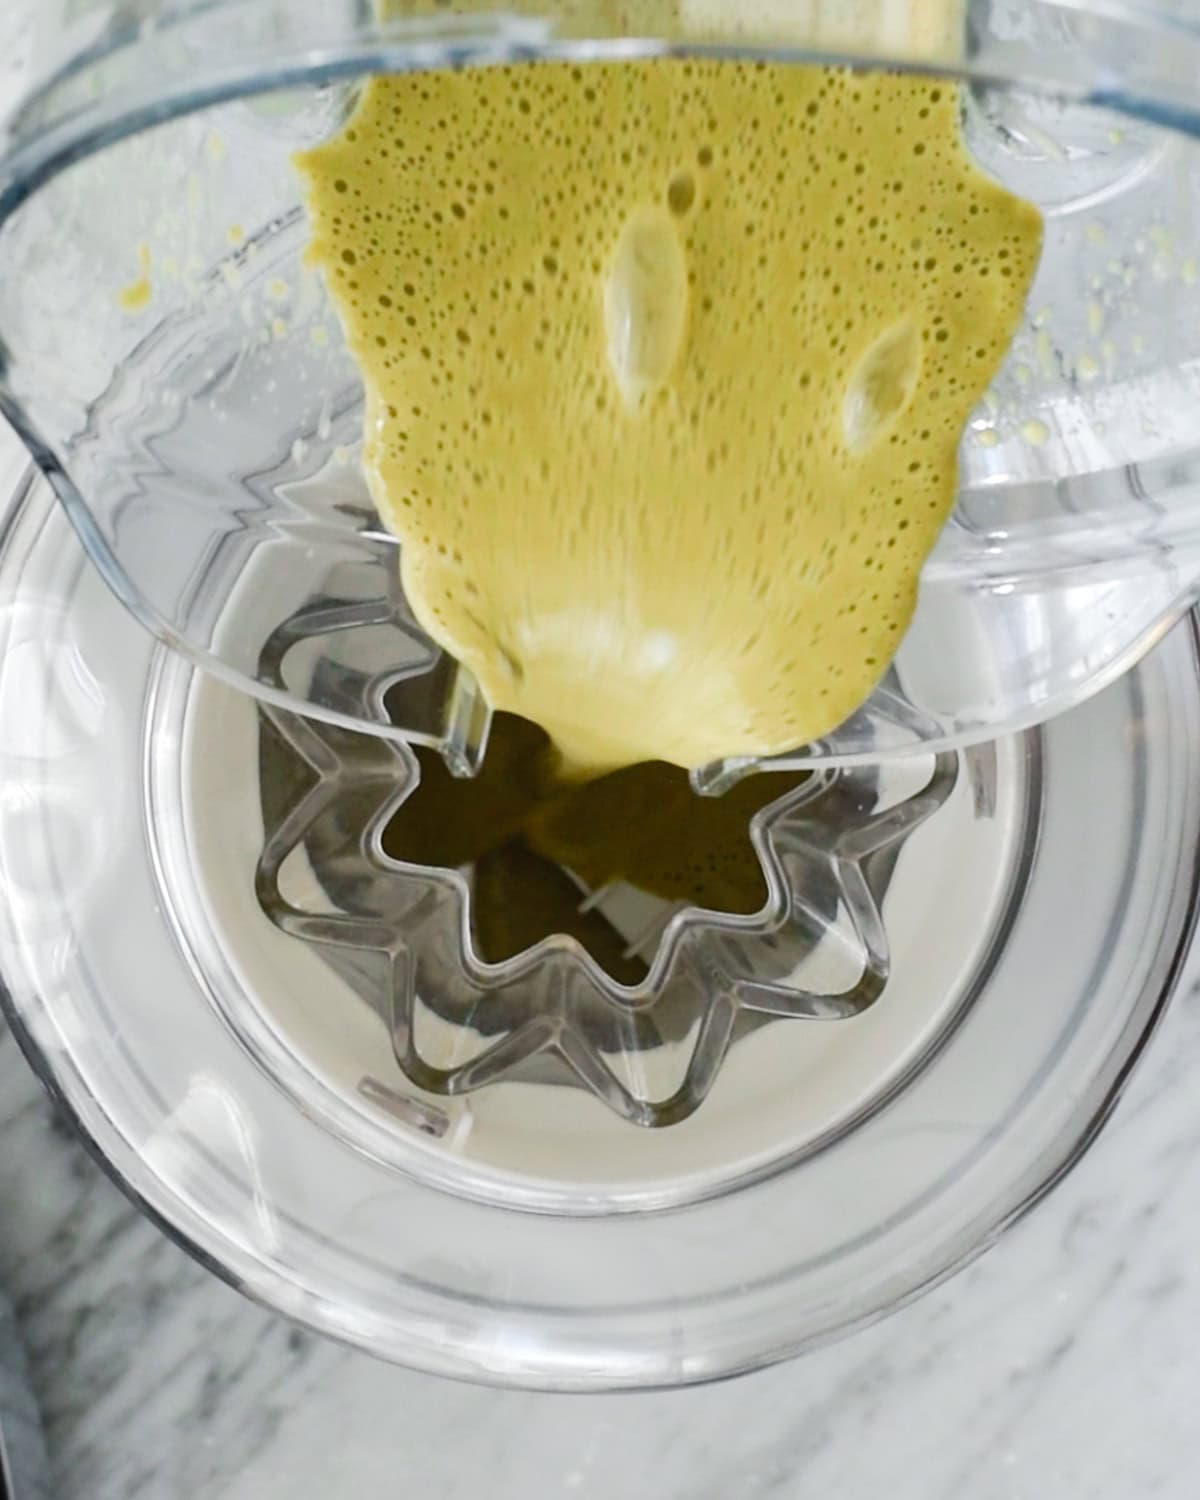 Dairy Free Matcha Ice Cream mixture being poured into an ice cream maker